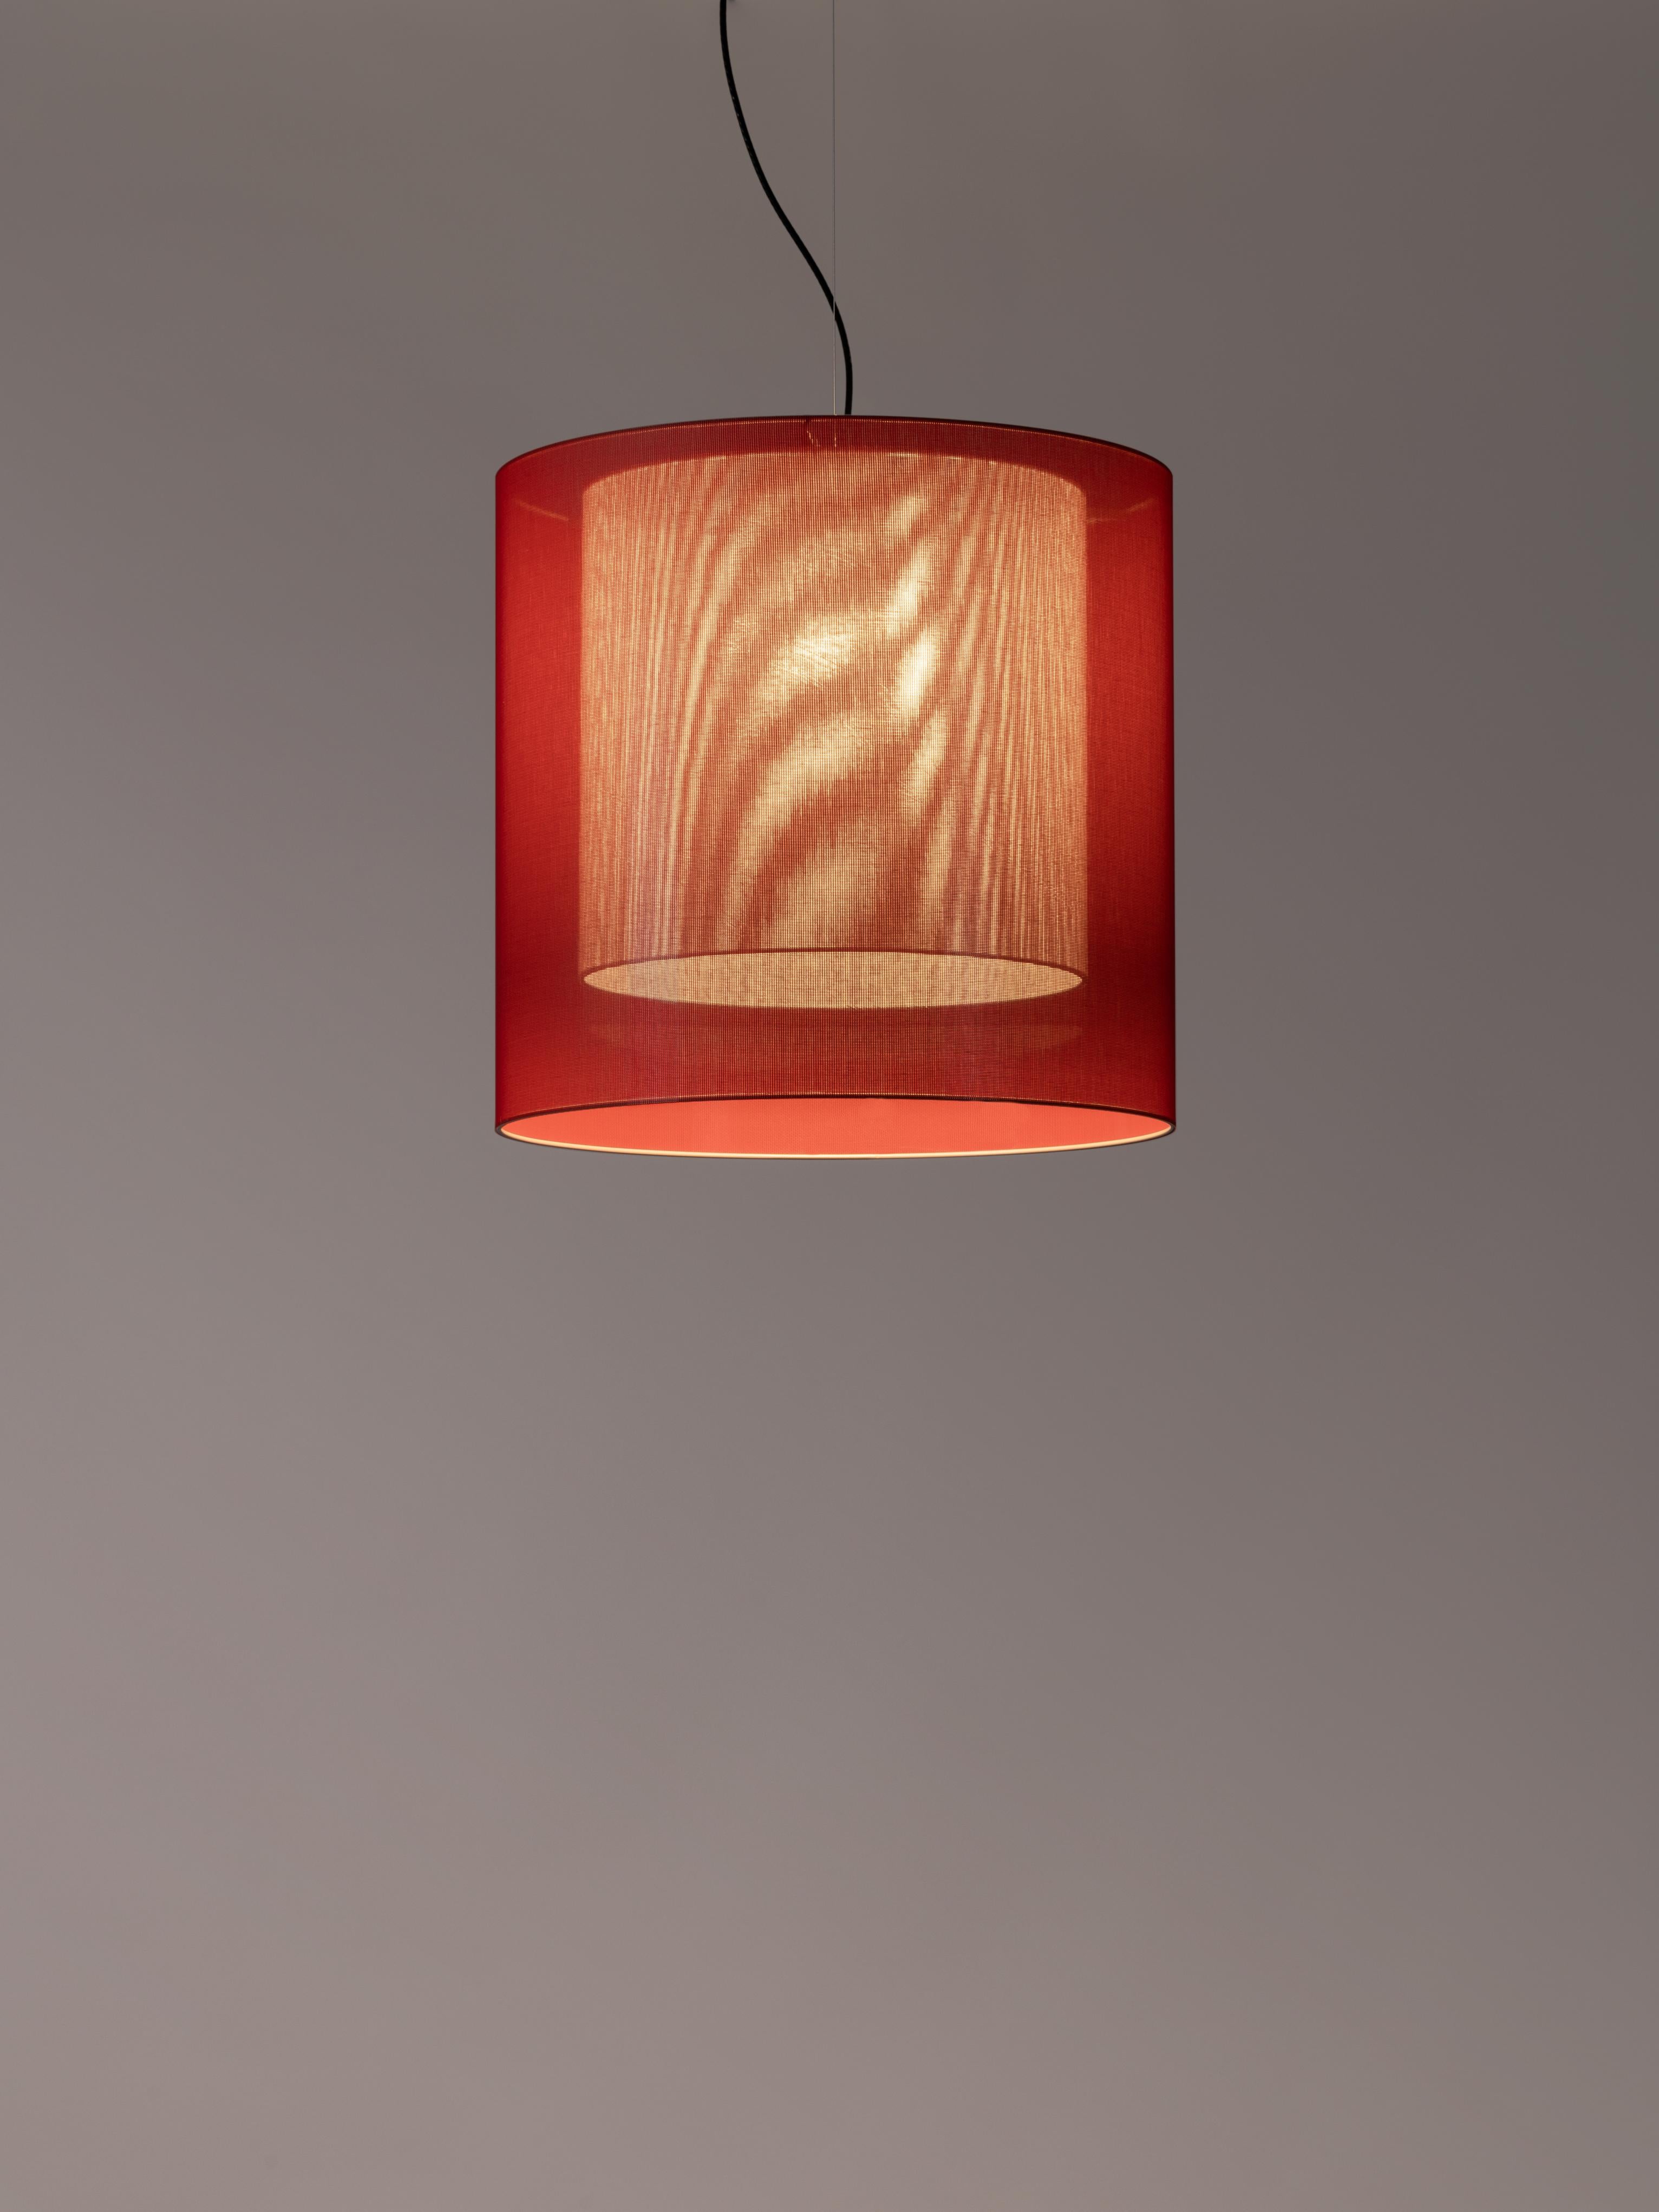 Red and white moaré lm pendant lamp by Antoni Arola
Dimensions: D 62 x H 60 cm
Materials: Metal, polyester.
Available in other colors and sizes.

Moaré’s multiple combinations of formats and colours make it highly versatile. The series takes